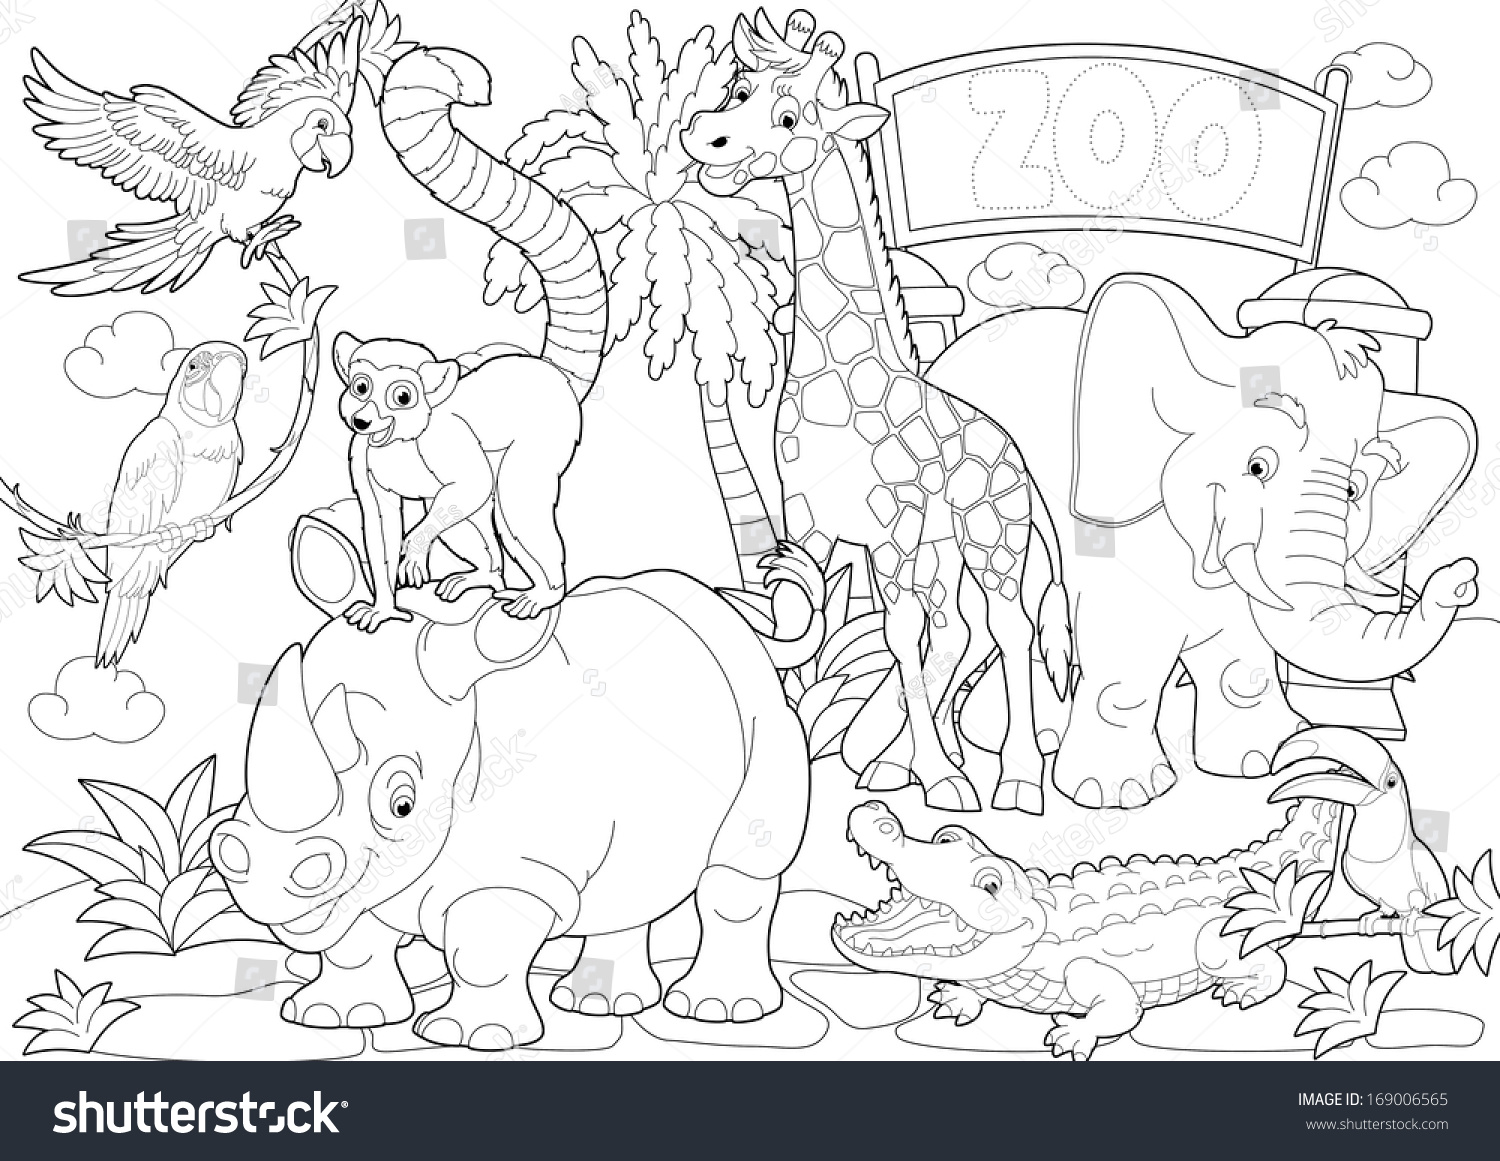 Zoo coloring pages Stock Illustrations, Images & Vectors ...